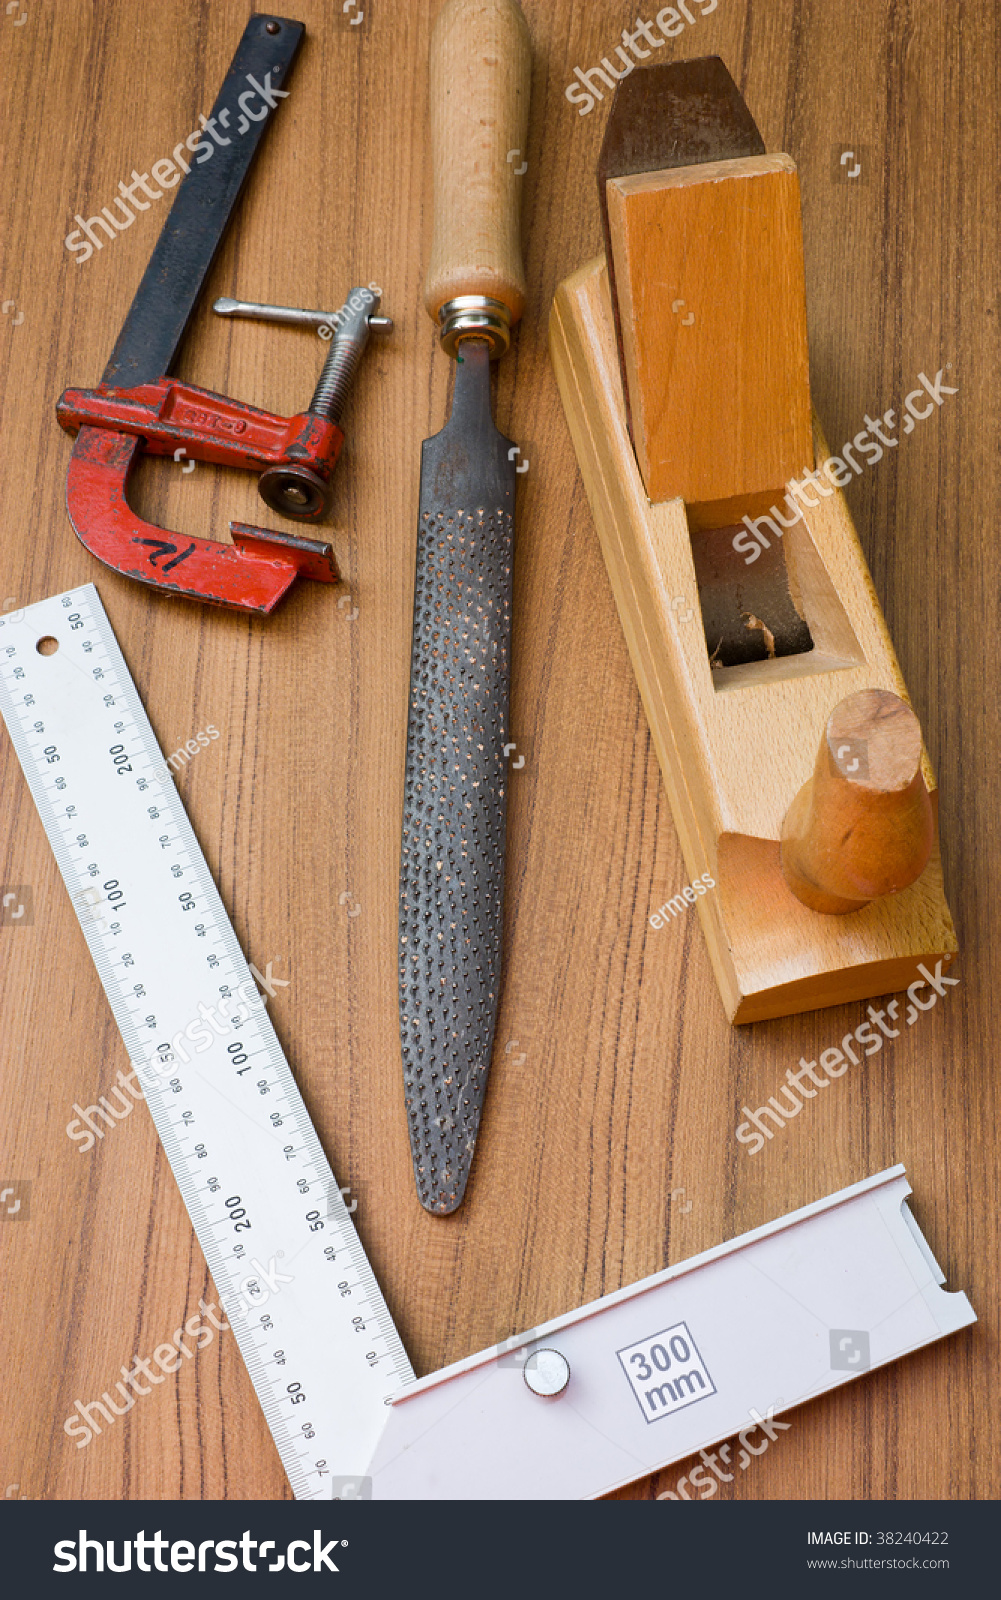 Woodworking Tools Carpentry Equipment Instruments For 